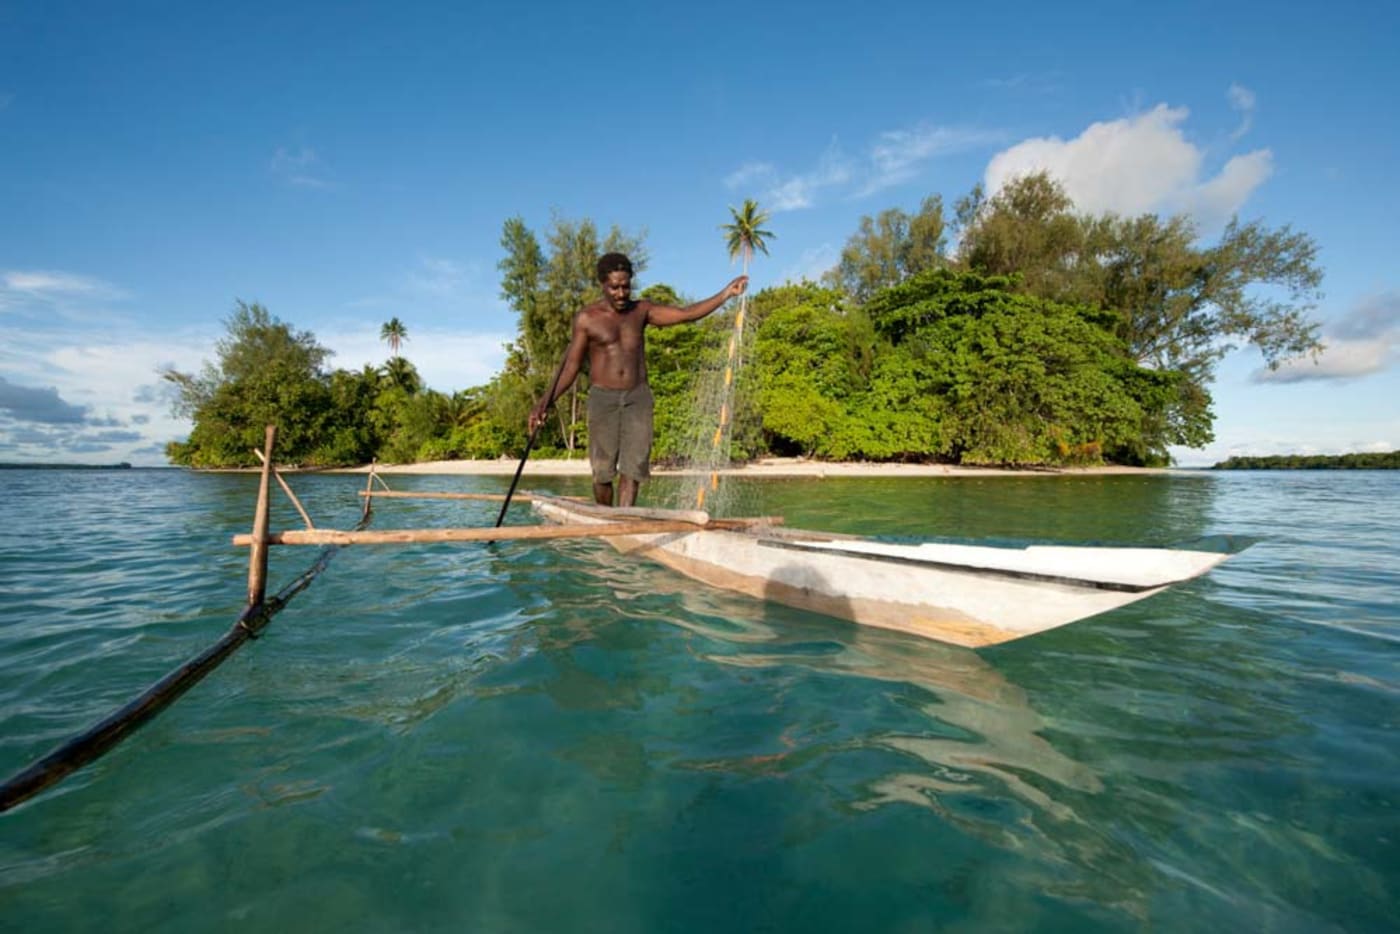 A Papua New Guinea islander paddles his dugout canoe to go fishing